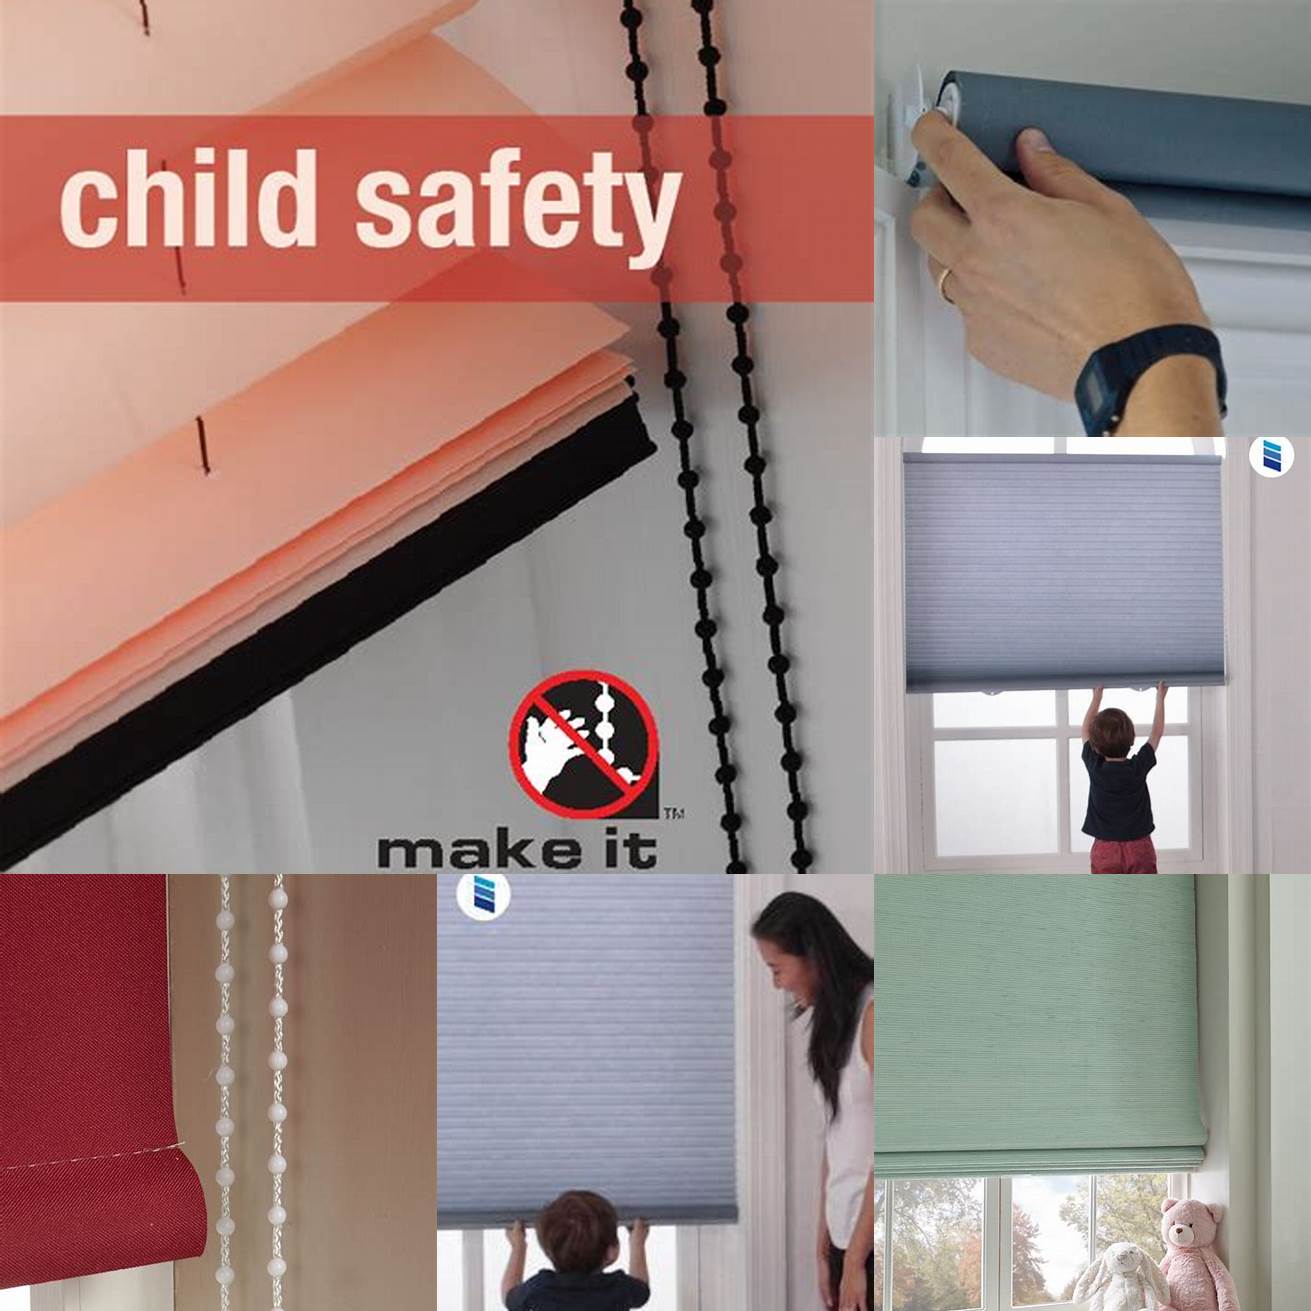 Safety Roller blinds can pose a safety hazard for children and pets if they have cords or chains that can cause strangulation or entanglement